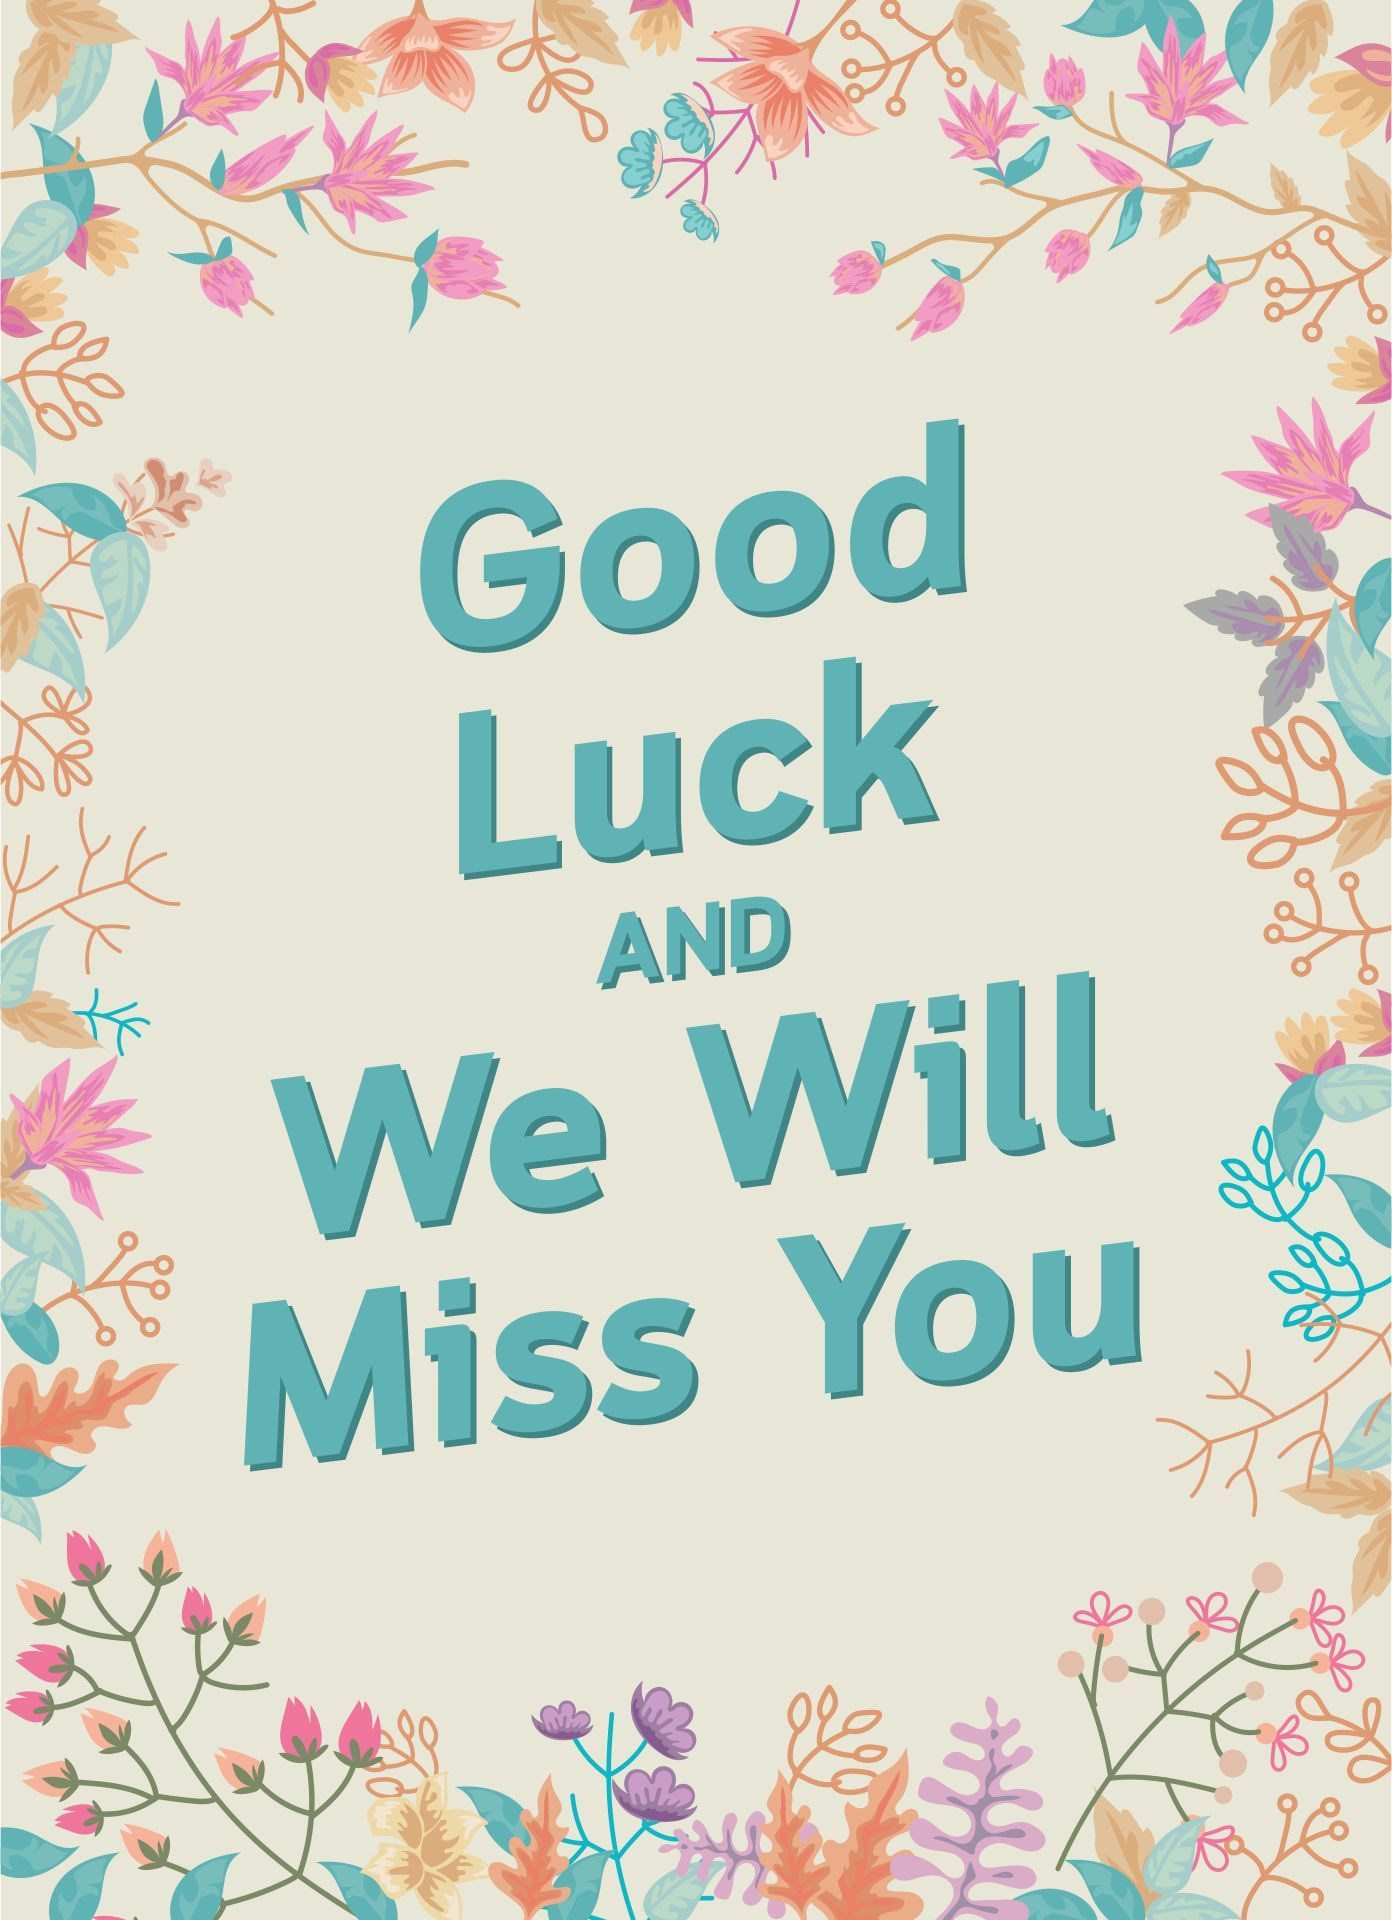 Good Luck And Farewell Card Templates within Free Printable We Will Miss You Greeting Cards